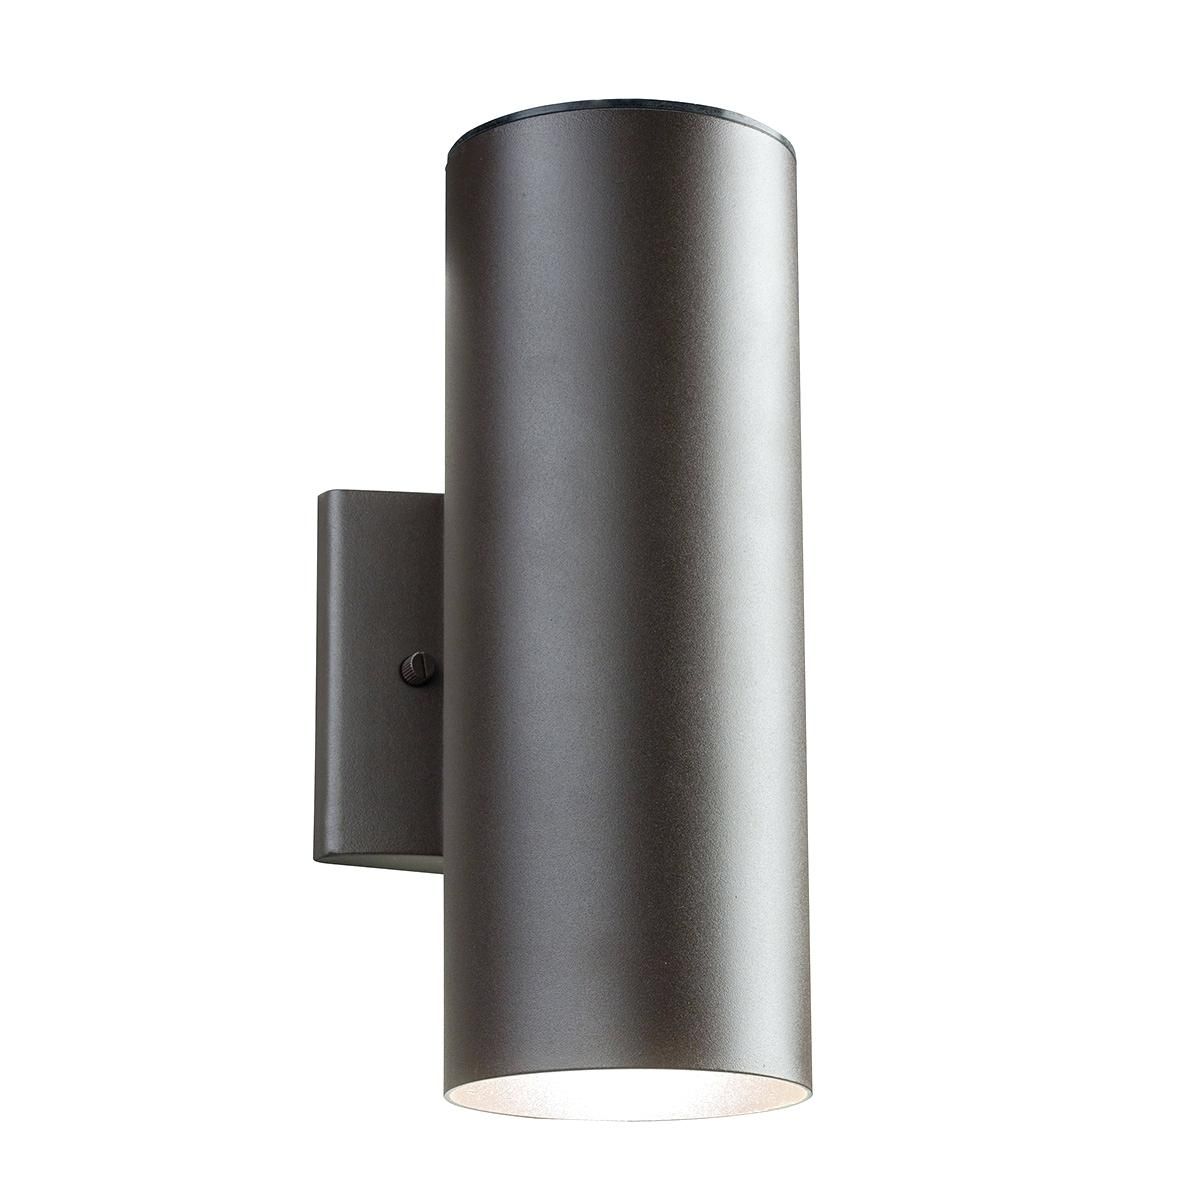 Outdoor Wall Lamp S Lights Uk Light With Outlet Lamps Amazon Within Outdoor Wall Lighting With Outlet (View 7 of 15)